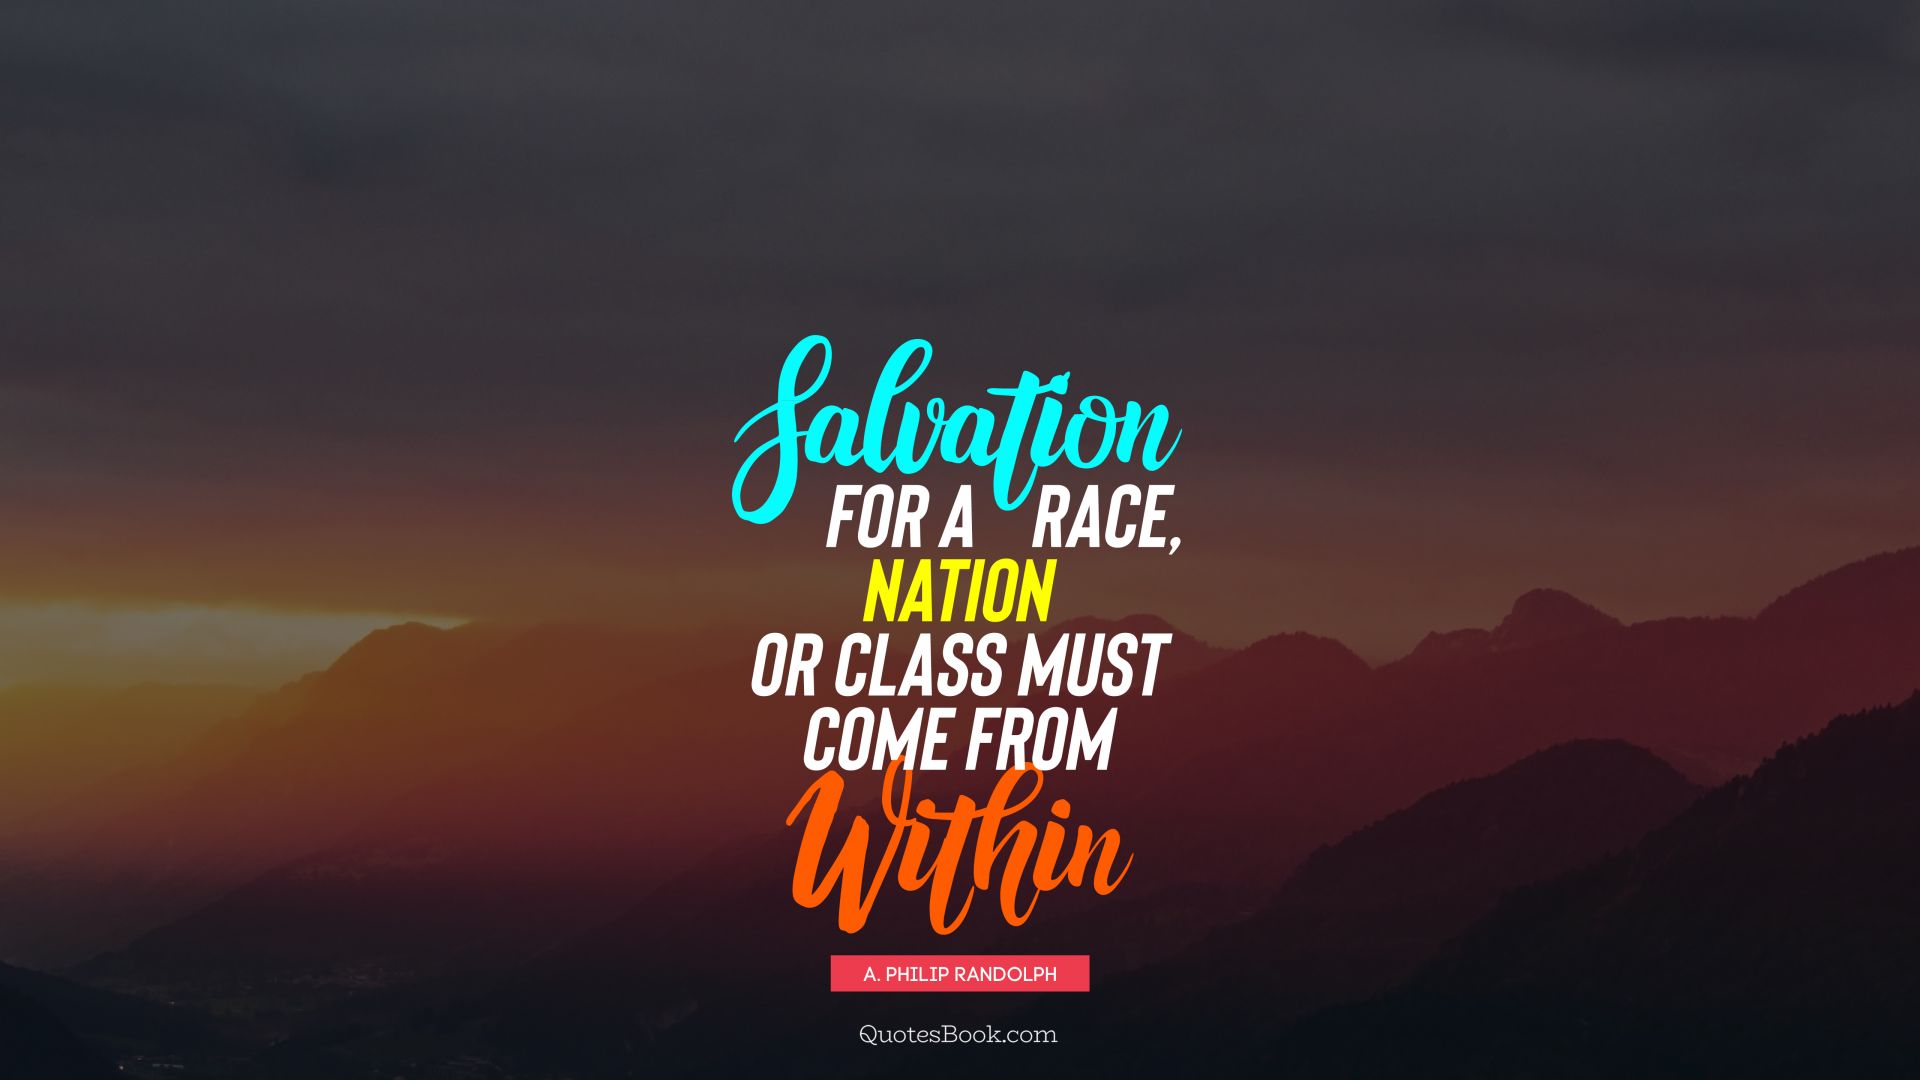 Salvation for a race, nation or class must come from within. - Quote by A. Philip Randolph